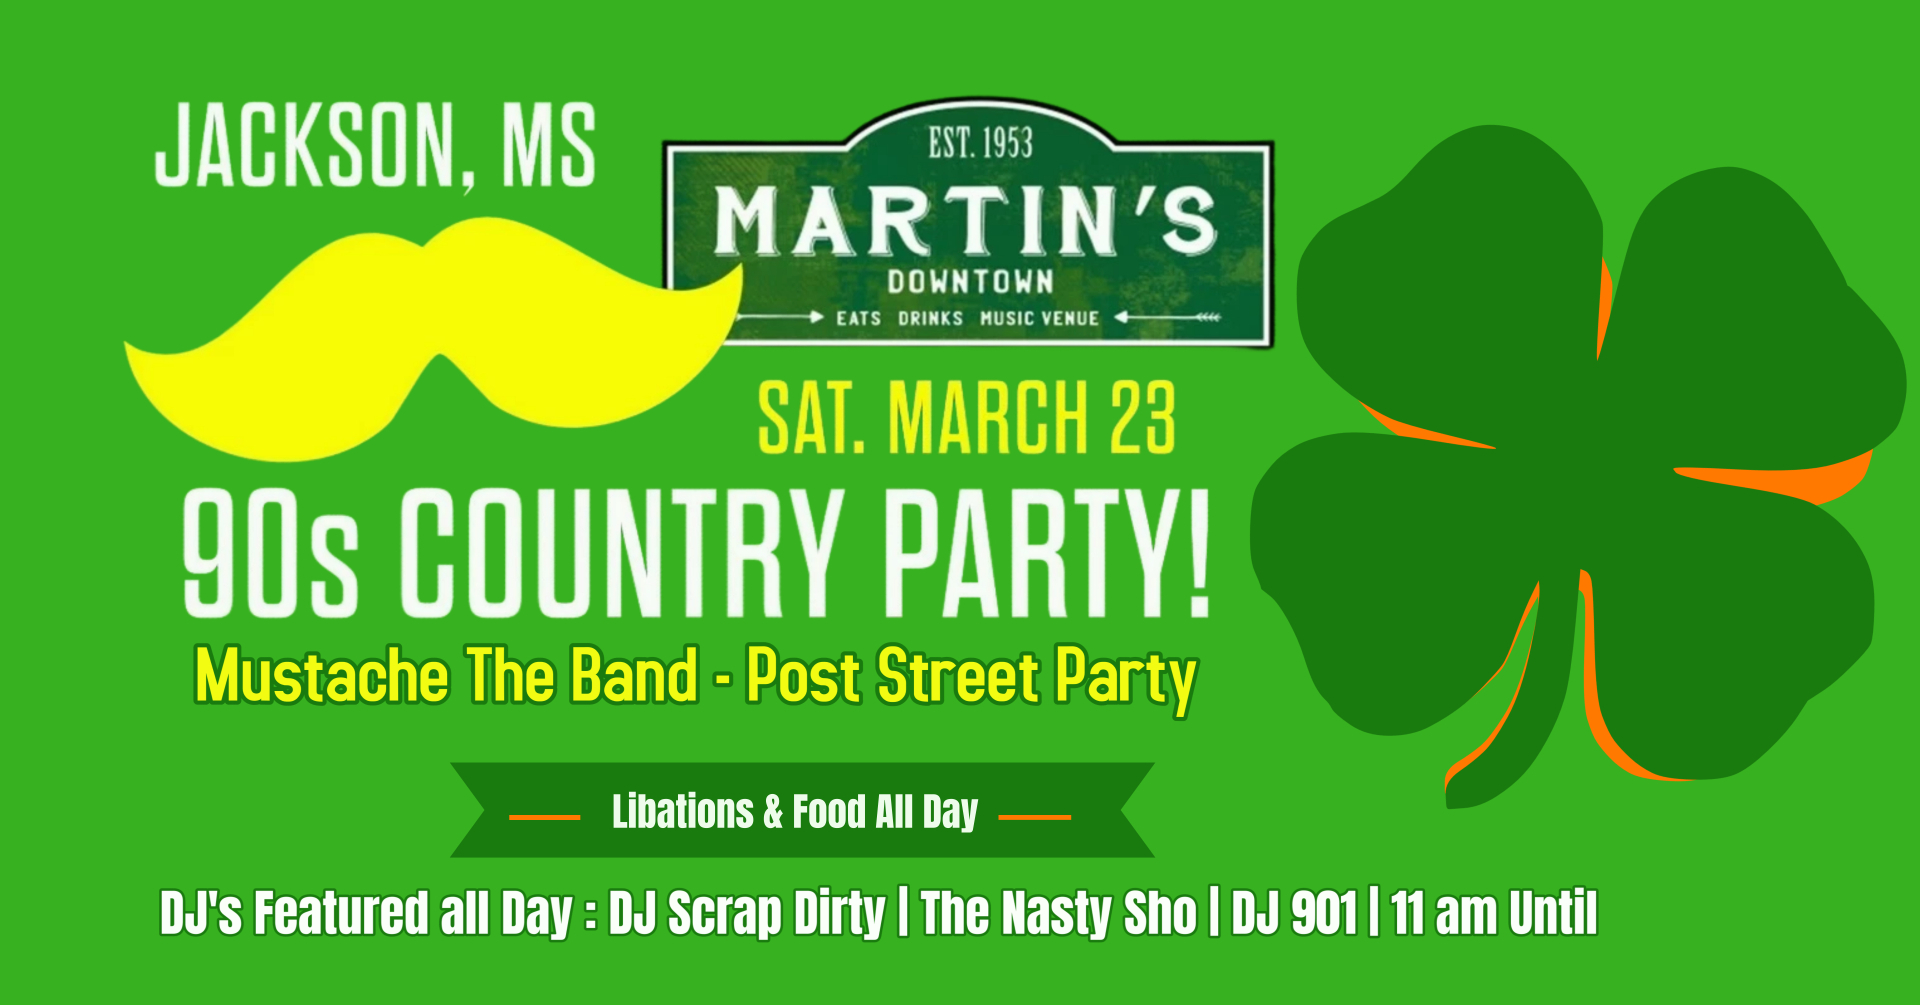 Martin’s Downtown St. Paddy’s Blowout with Mustache the Band